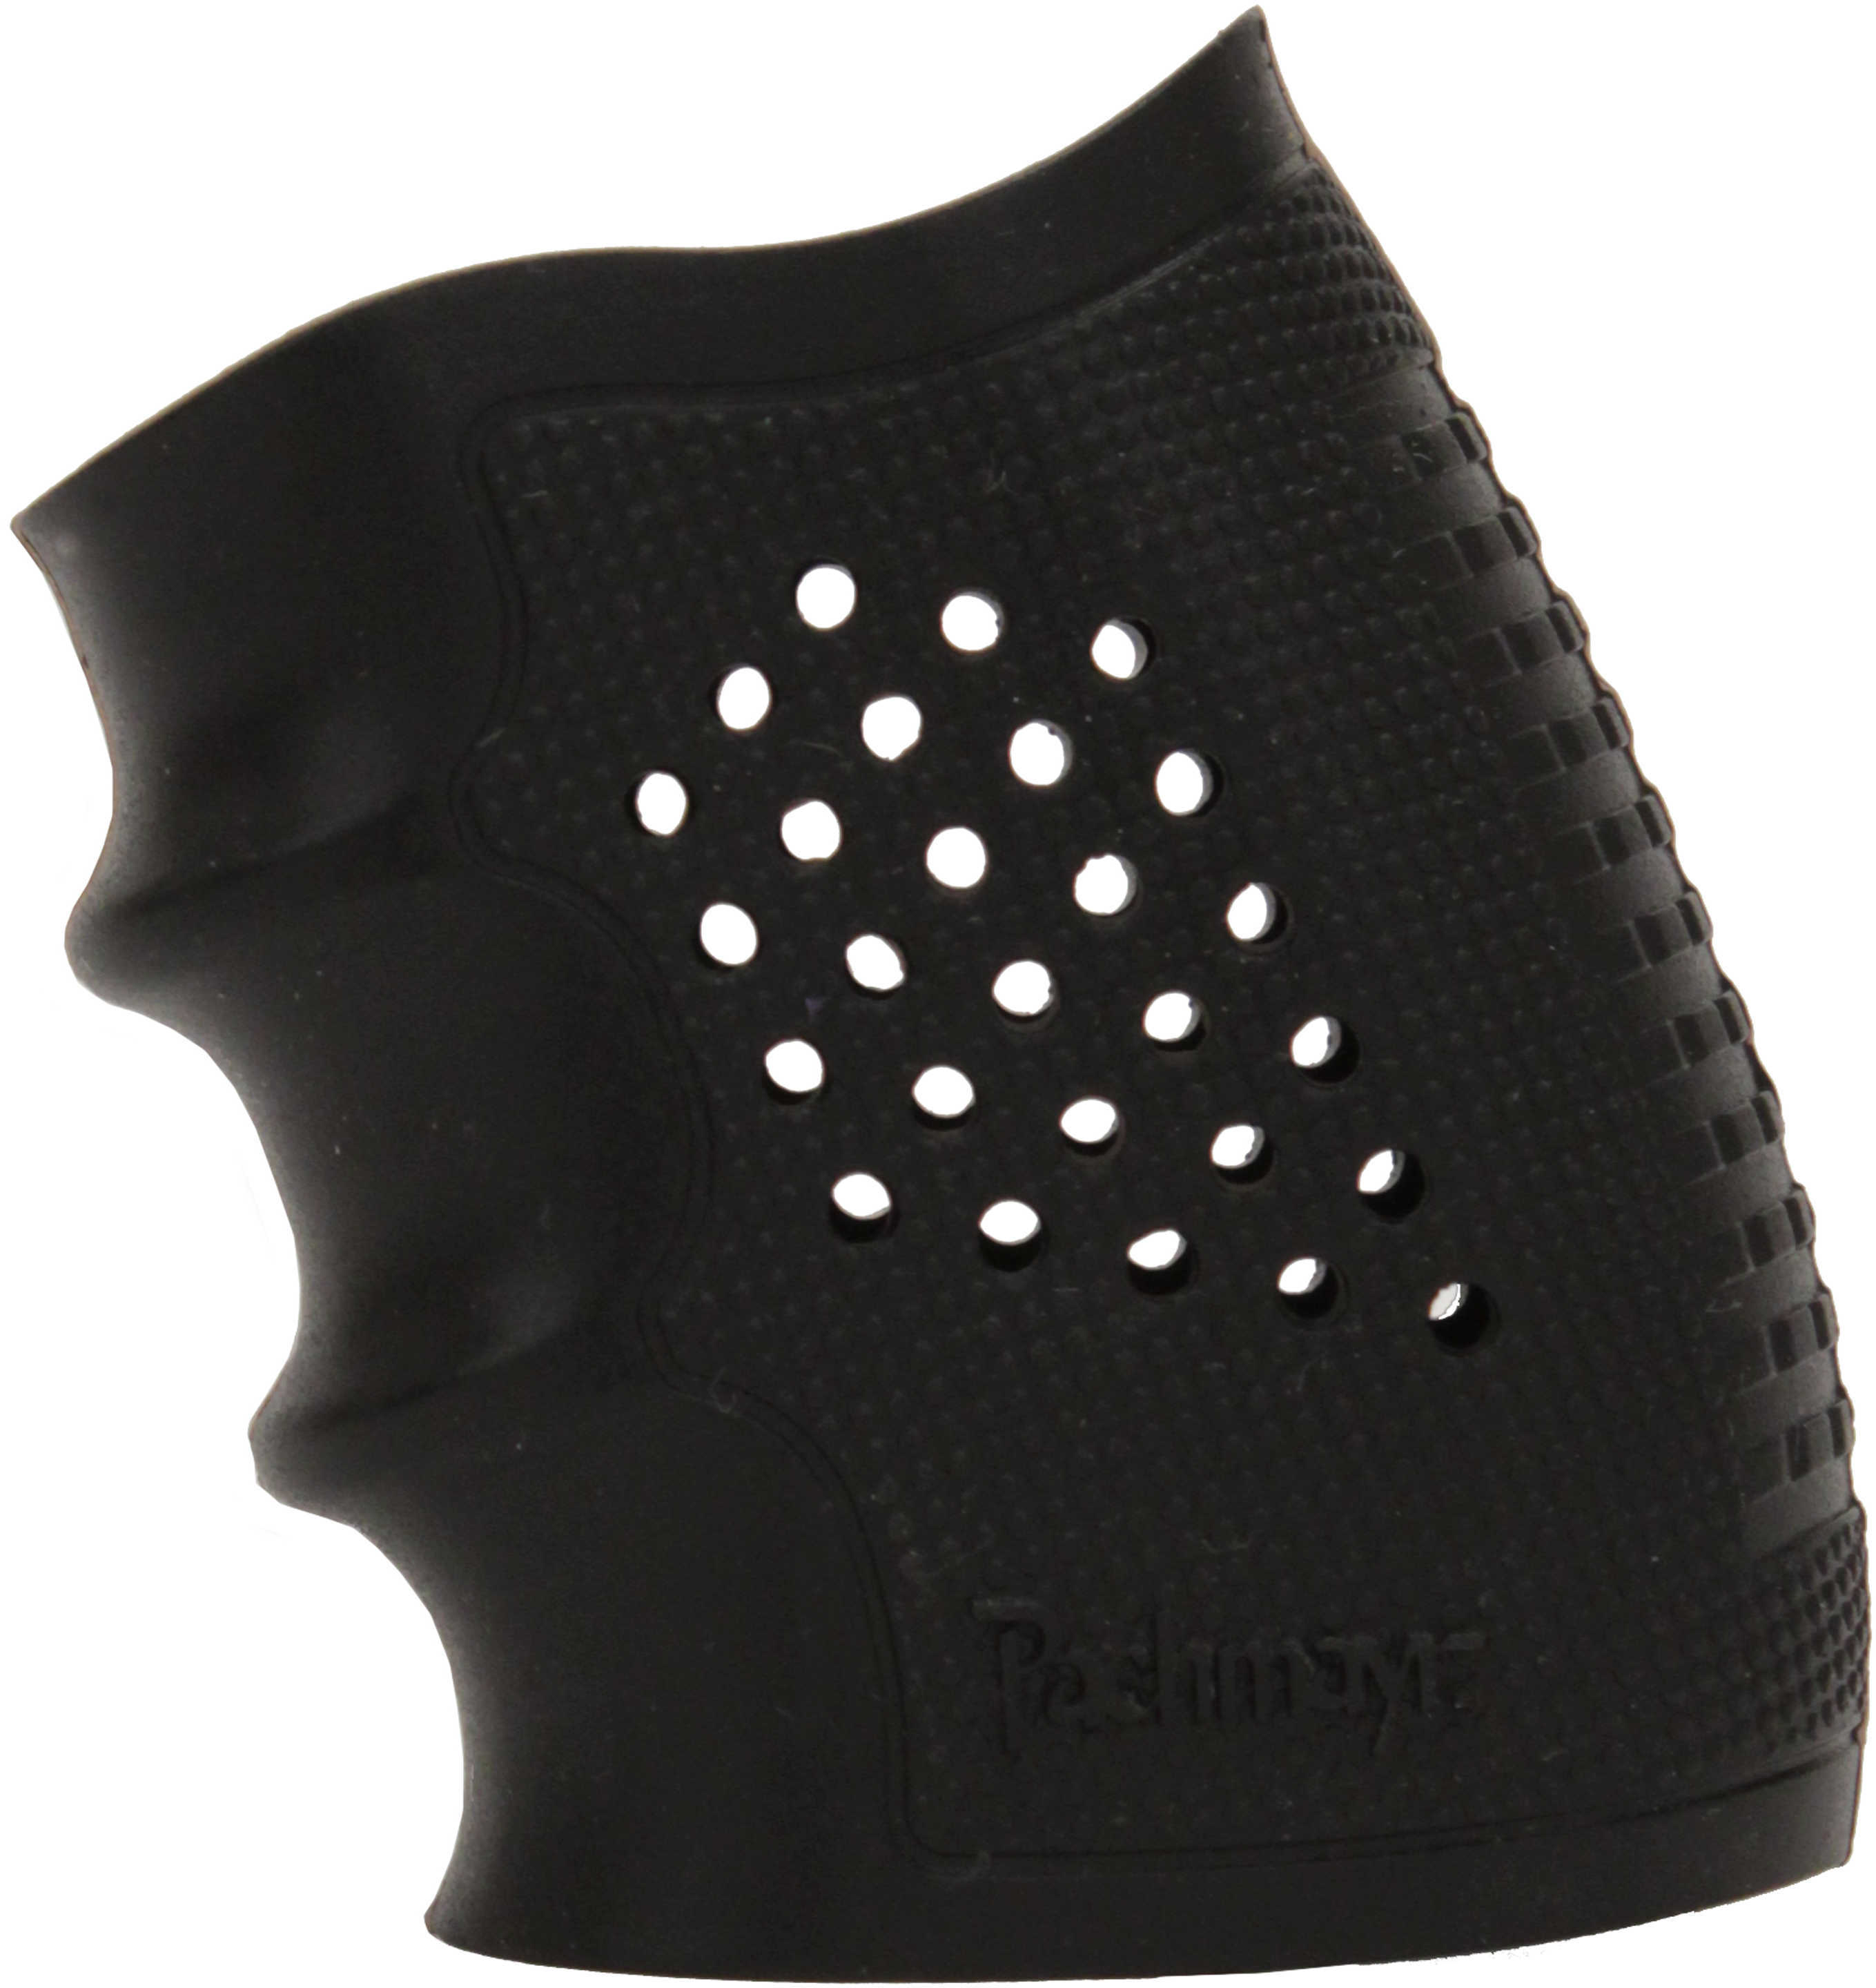 Pachmayr Tactical Grip Glove For S&W M&P